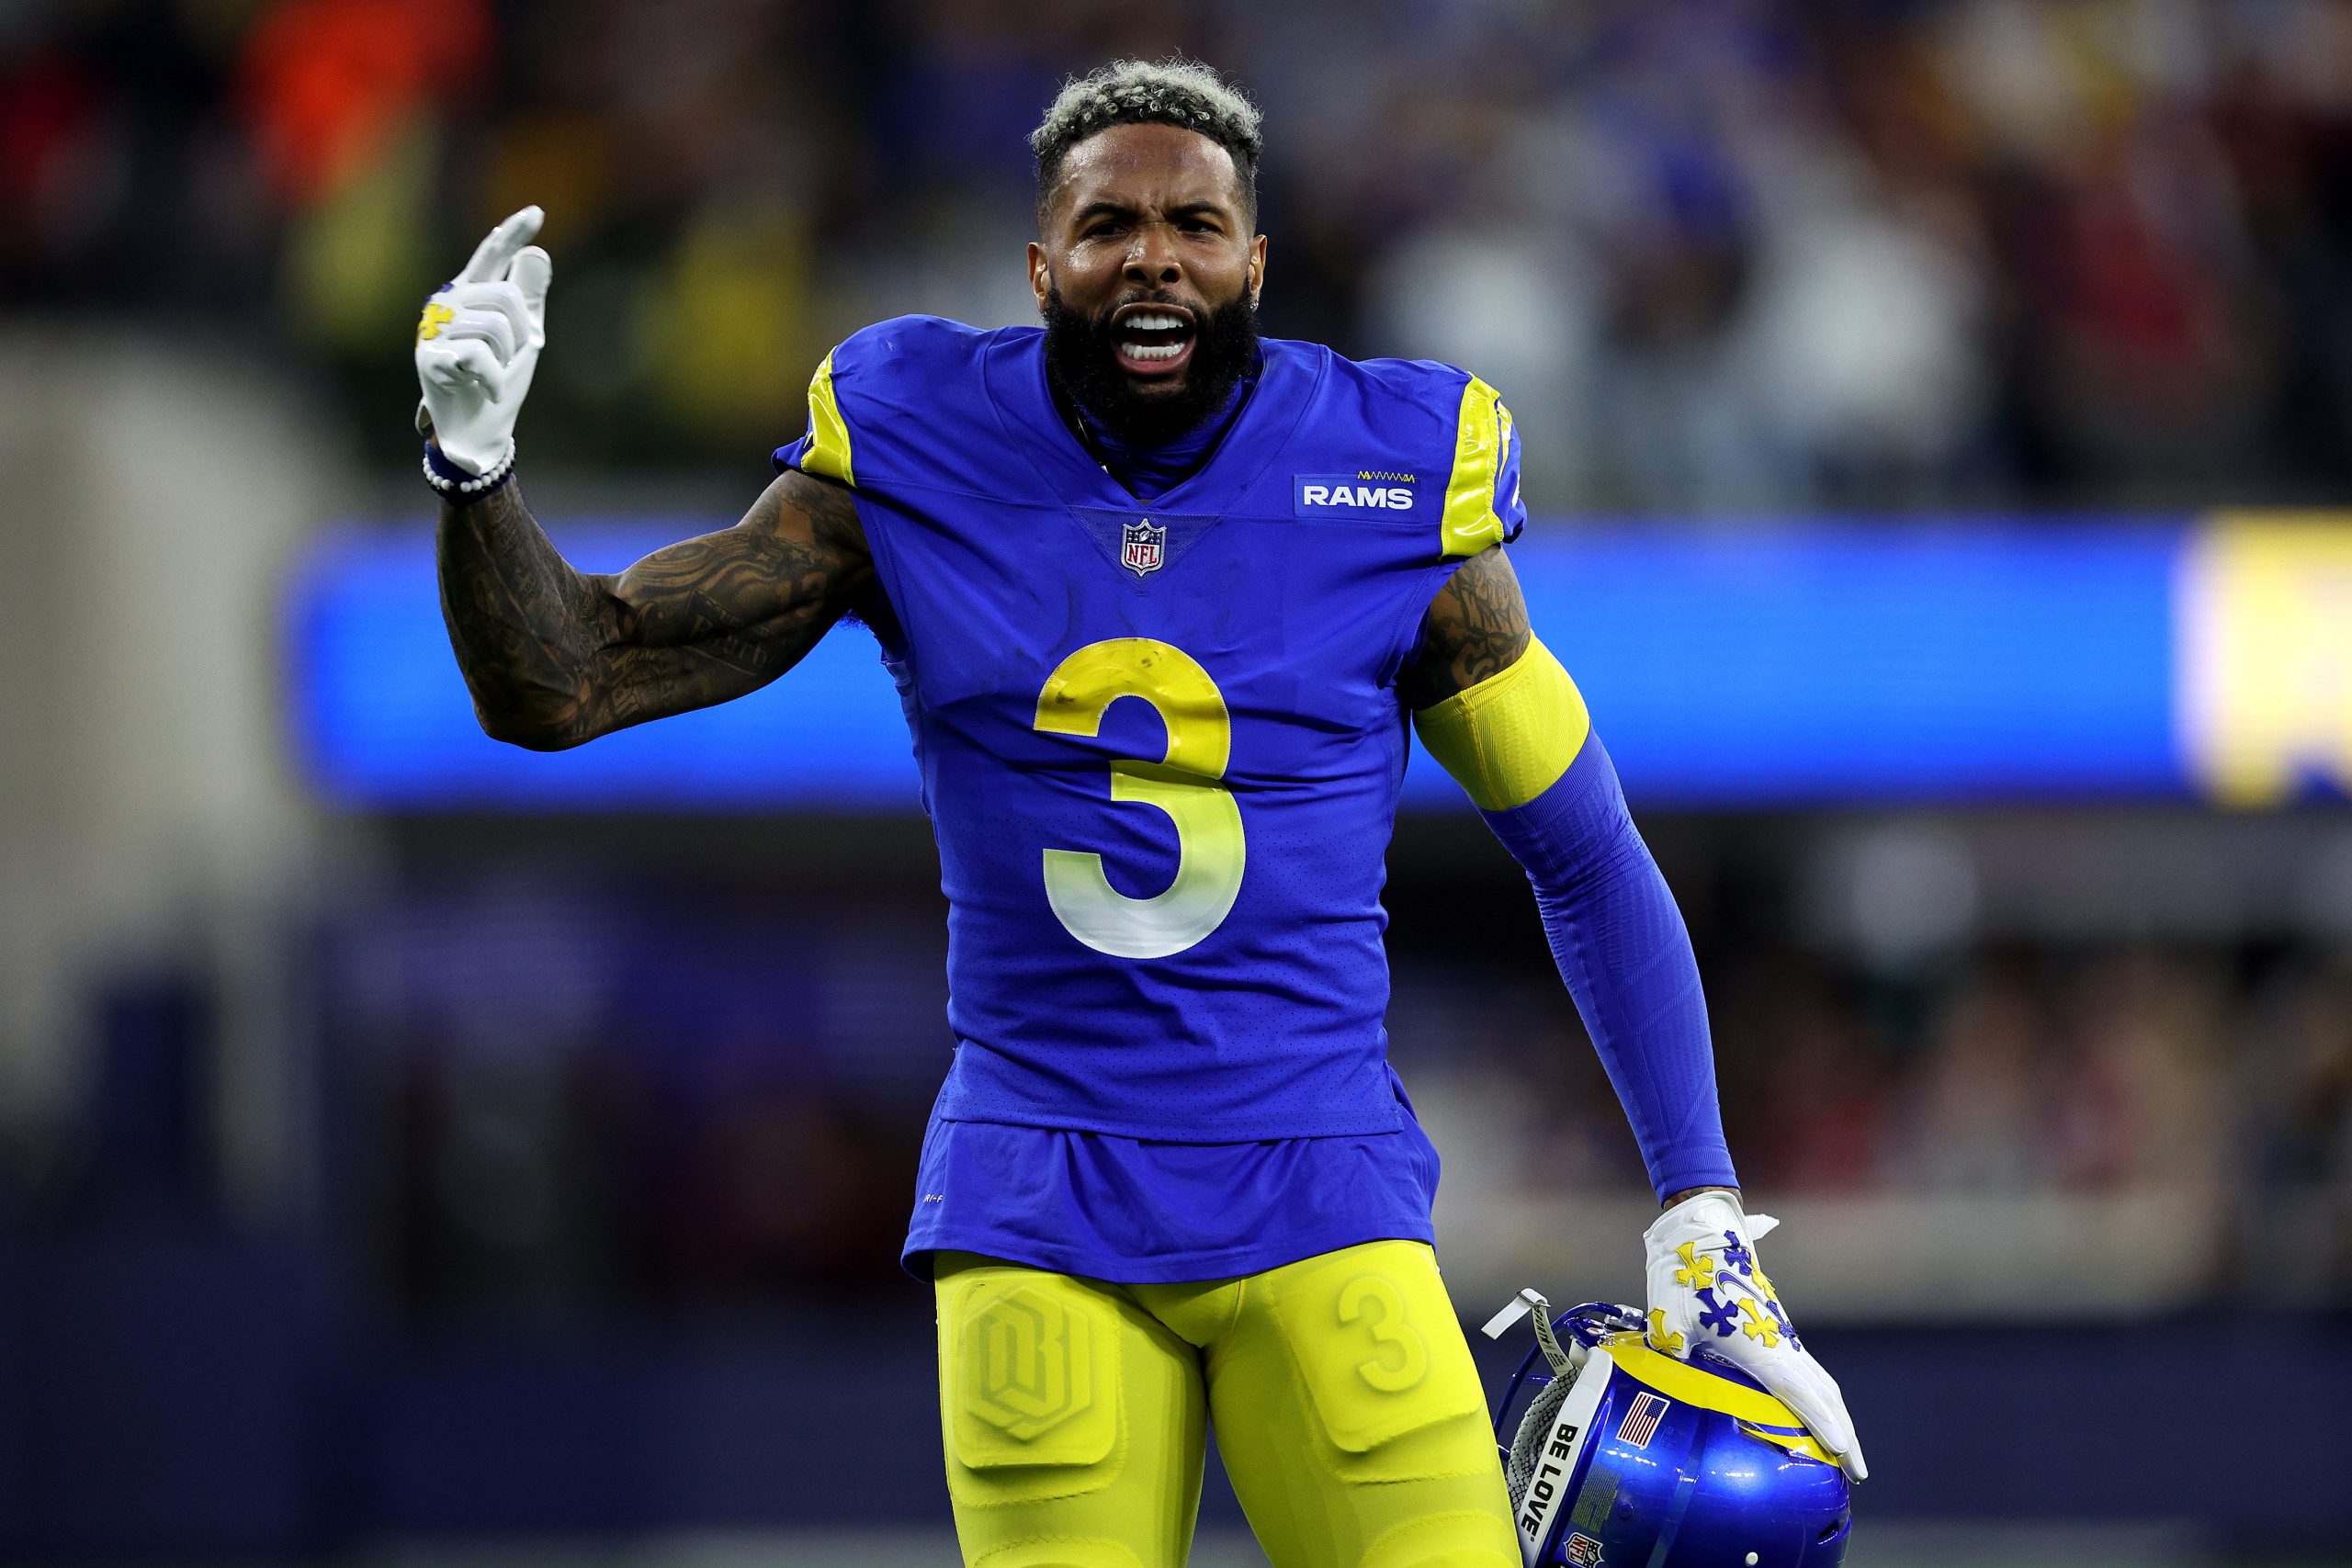 INGLEWOOD, CALIFORNIA - JANUARY 17: Odell Beckham Jr. #3 of the Los Angeles Rams reacts during the ...